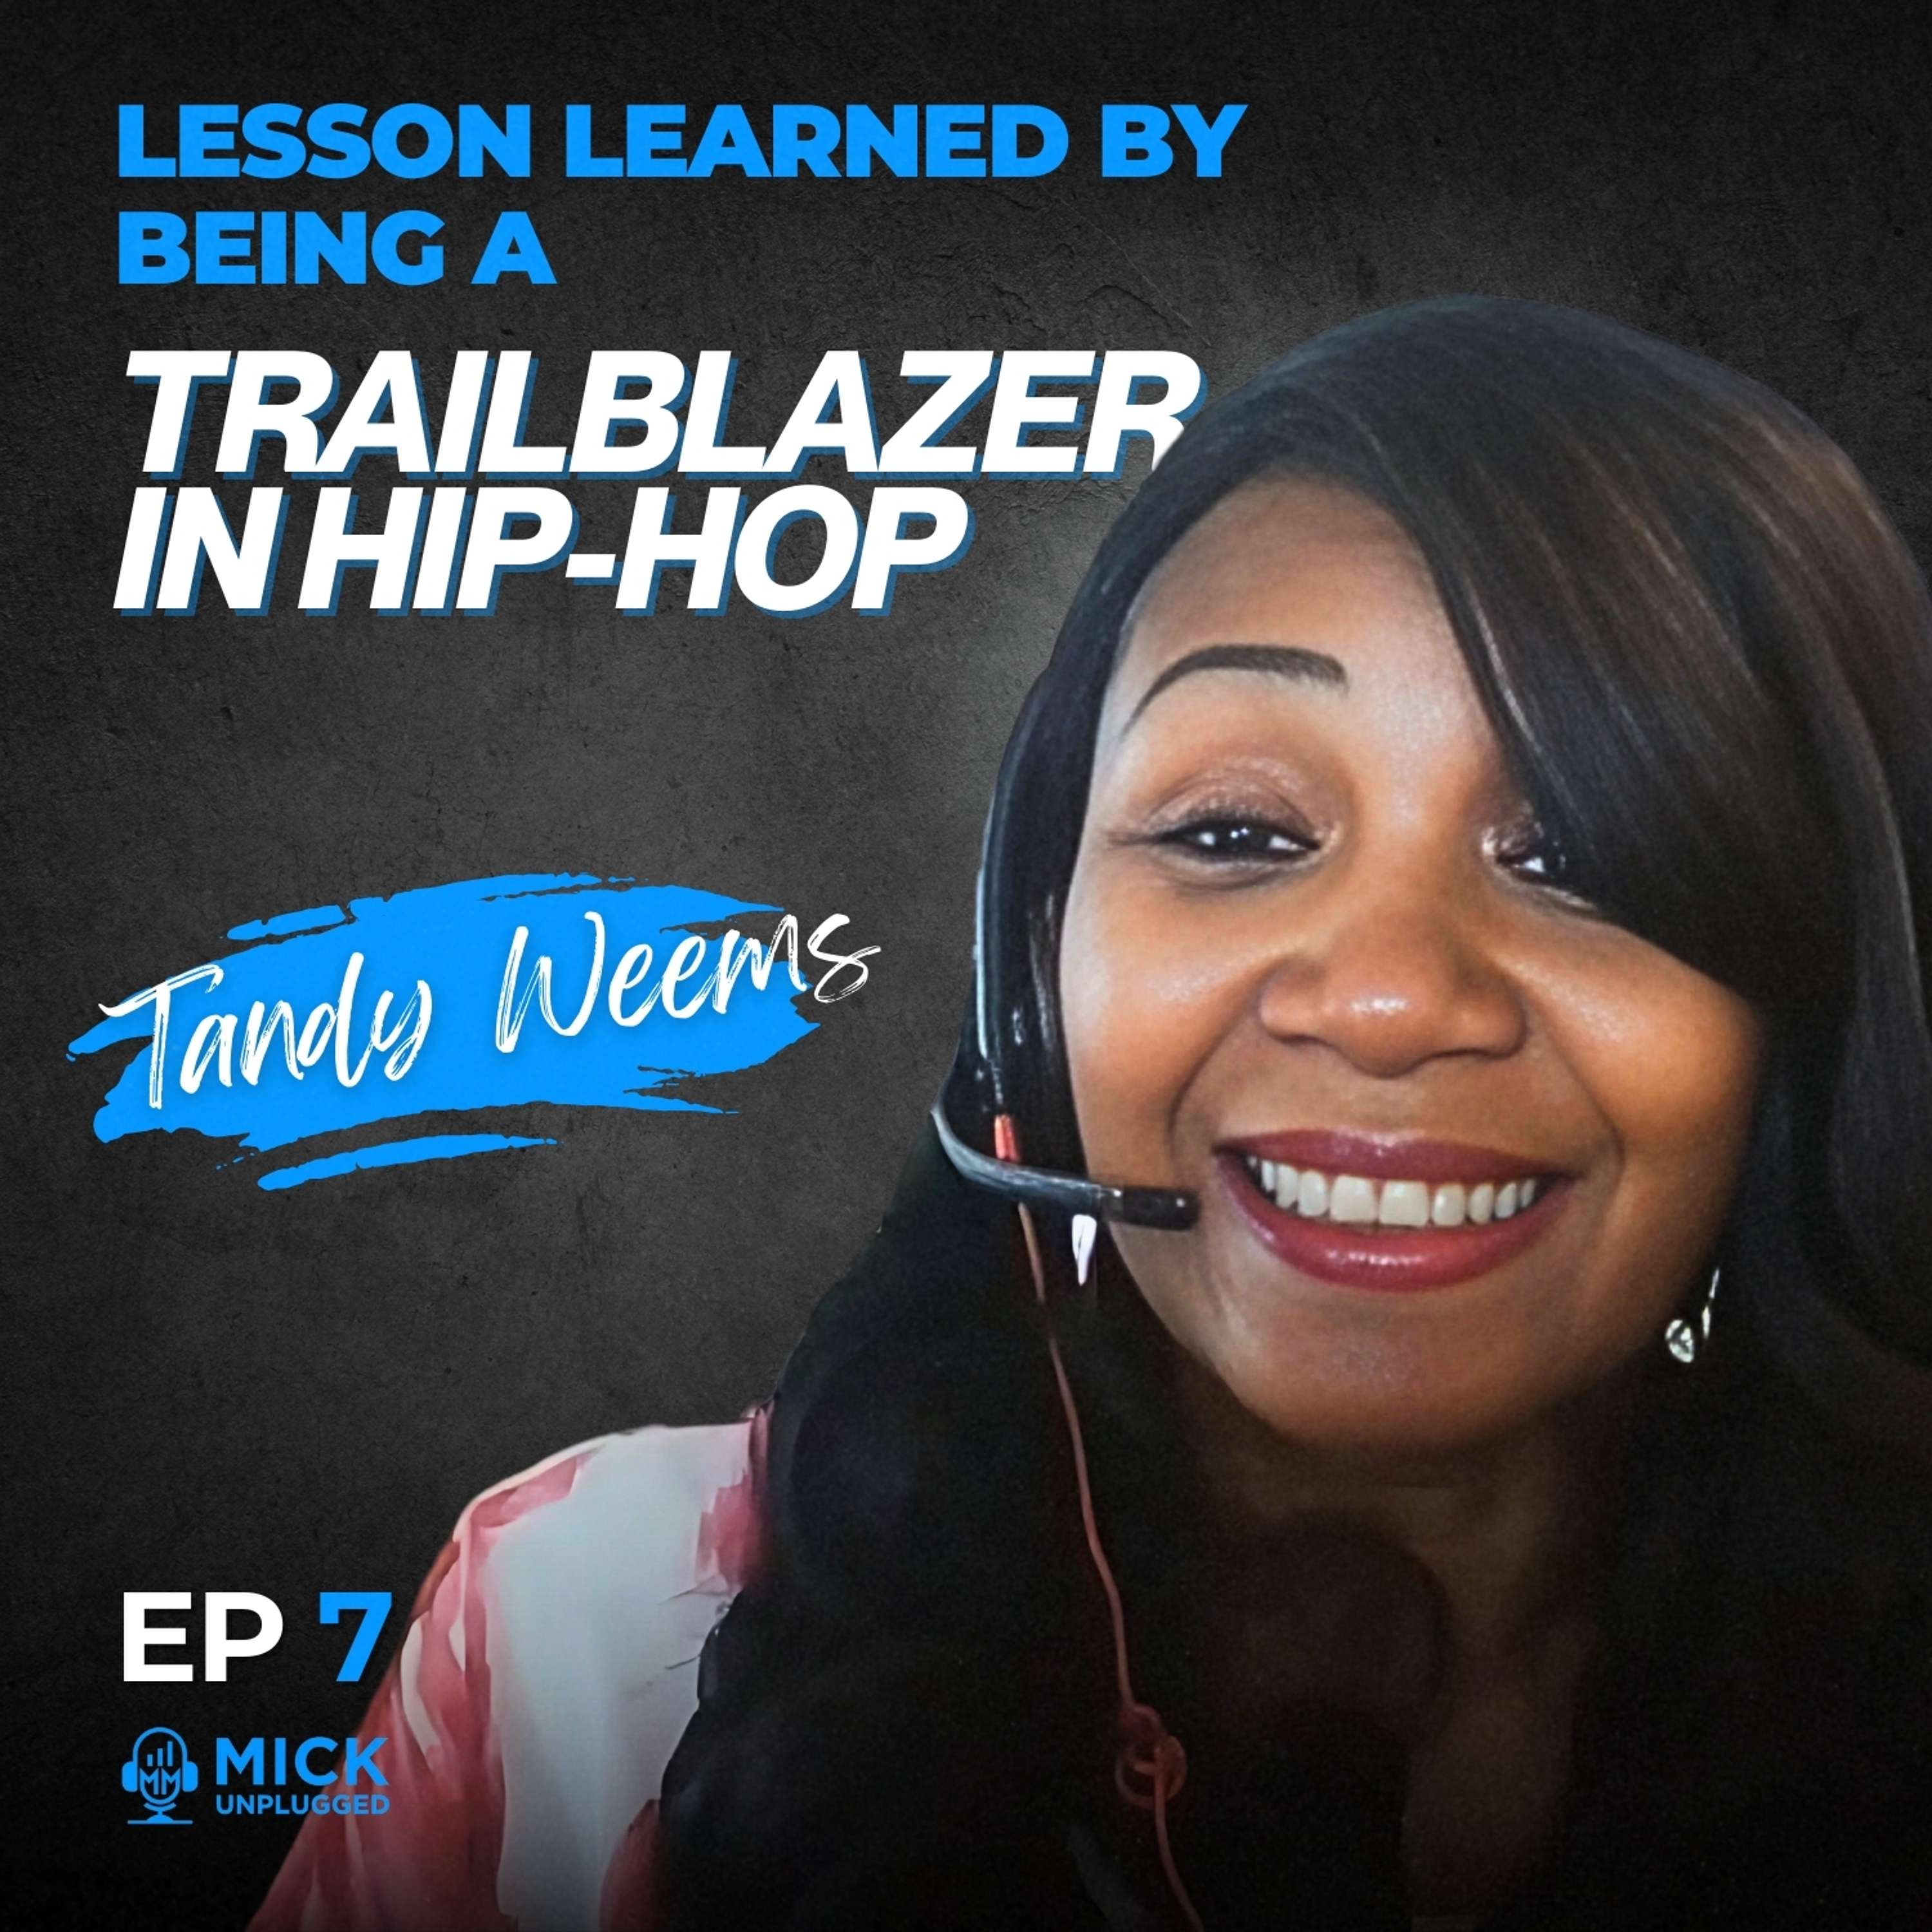 Tandy Weems | - Lesson Learned By Being a A Trailblazer in Hip-Hop - Mick Unplugged [Ep 7]